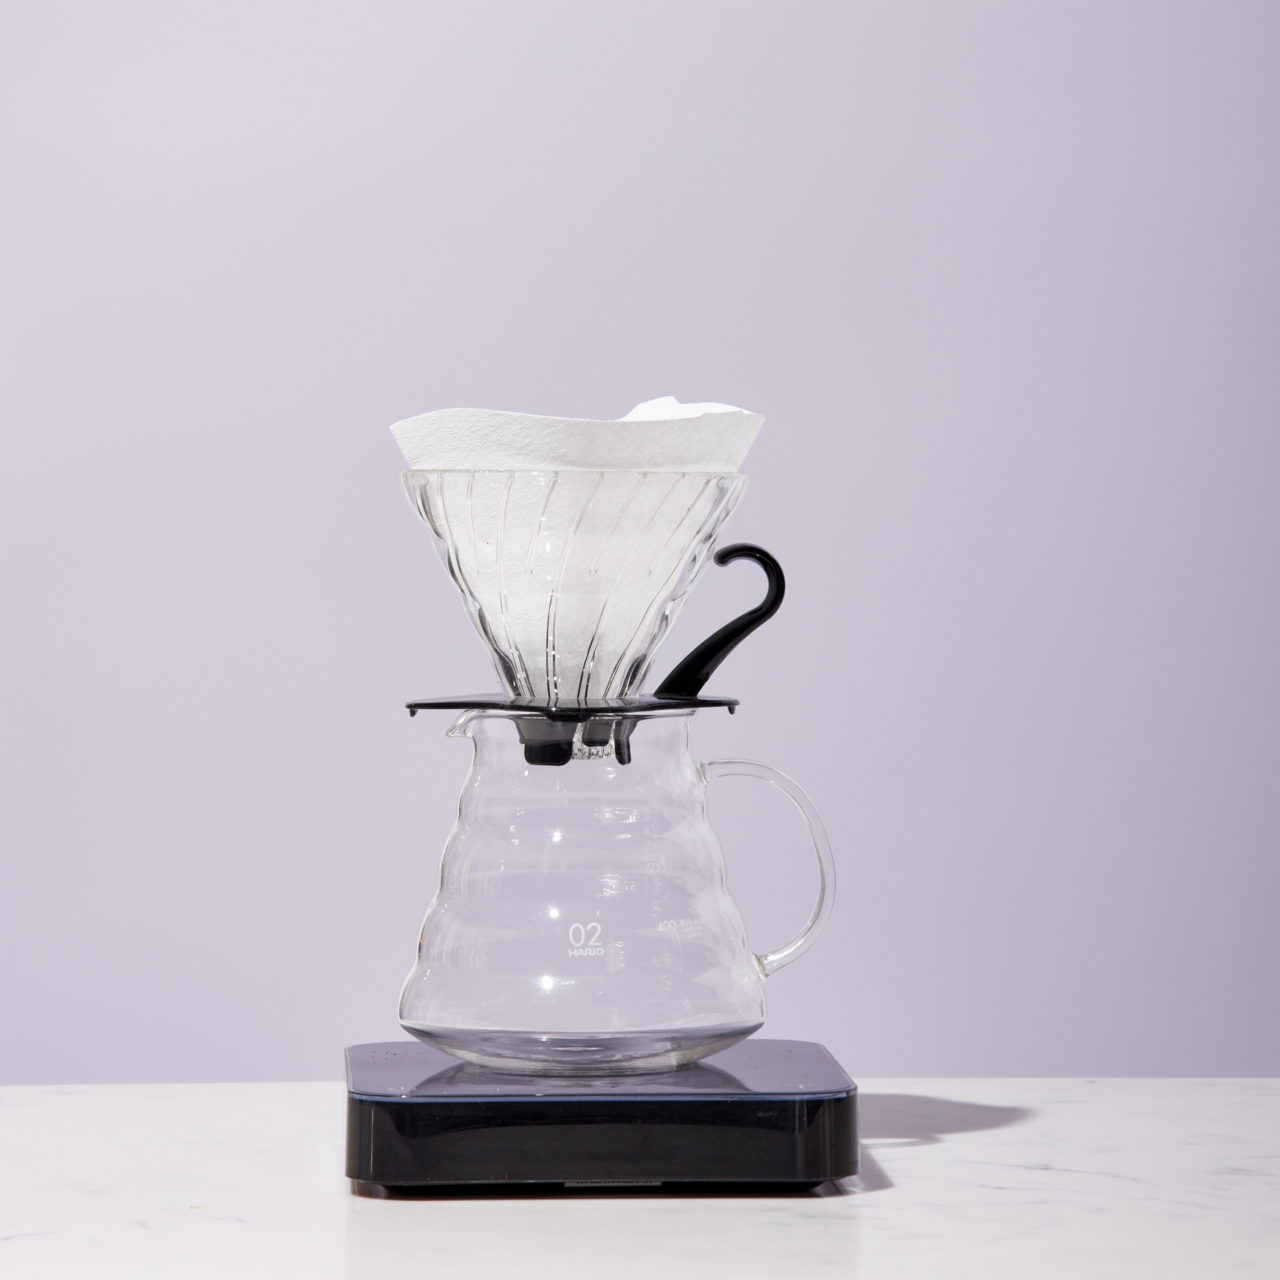 V60 on a scale